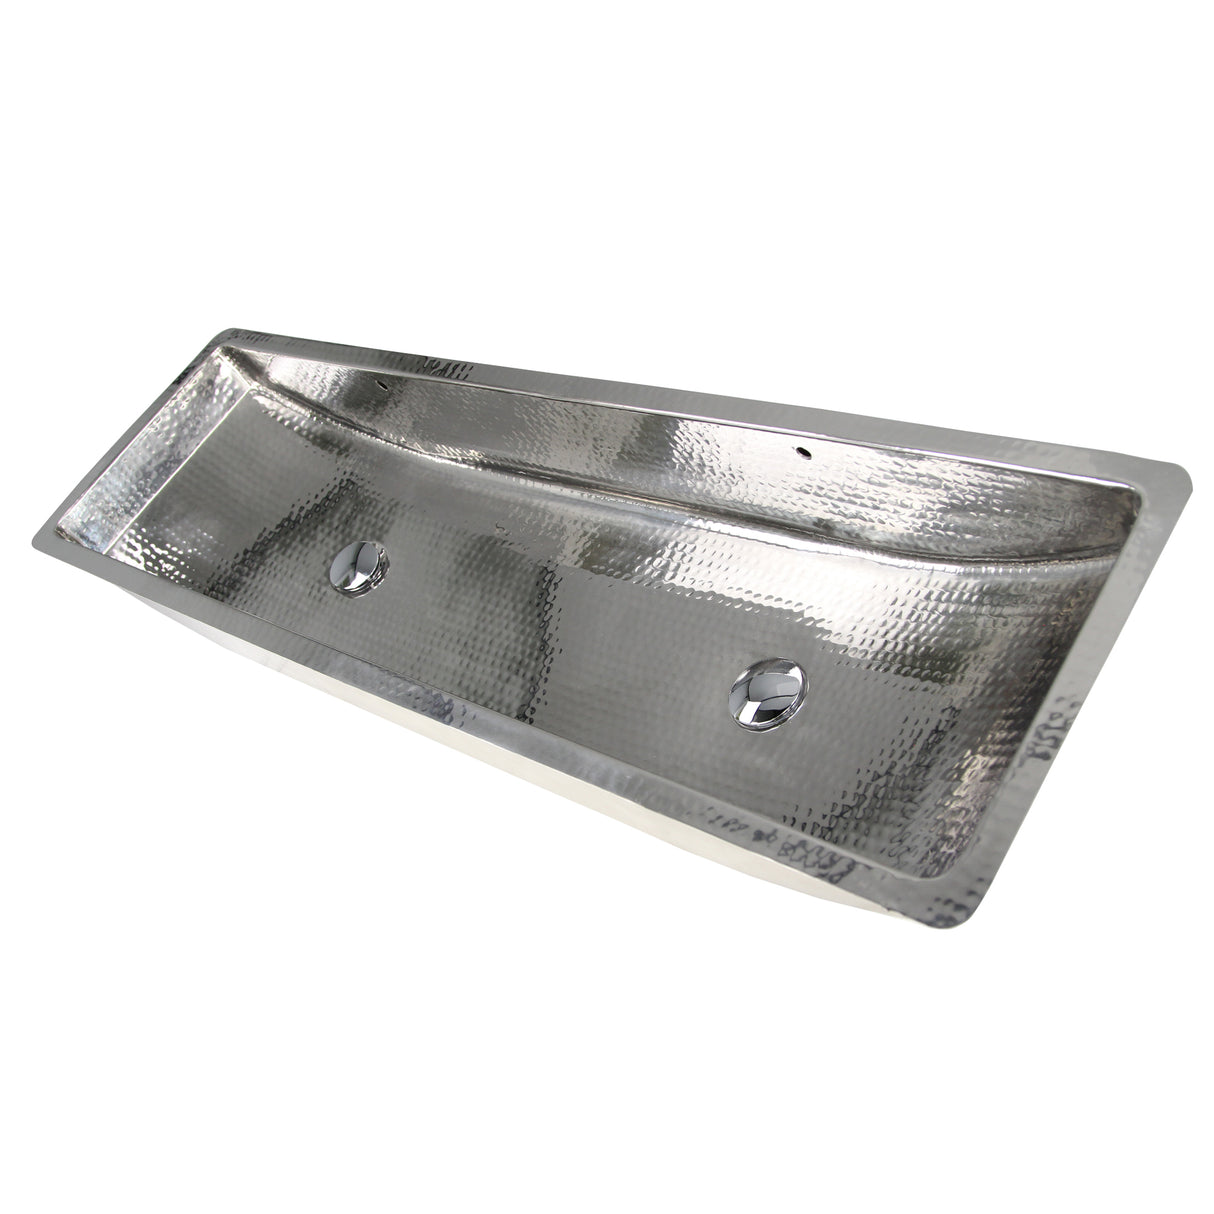 Nantucket Sinks' TRS48-OF Stainless Steel Double Trough Undermount Bathroom Sink with Overflow